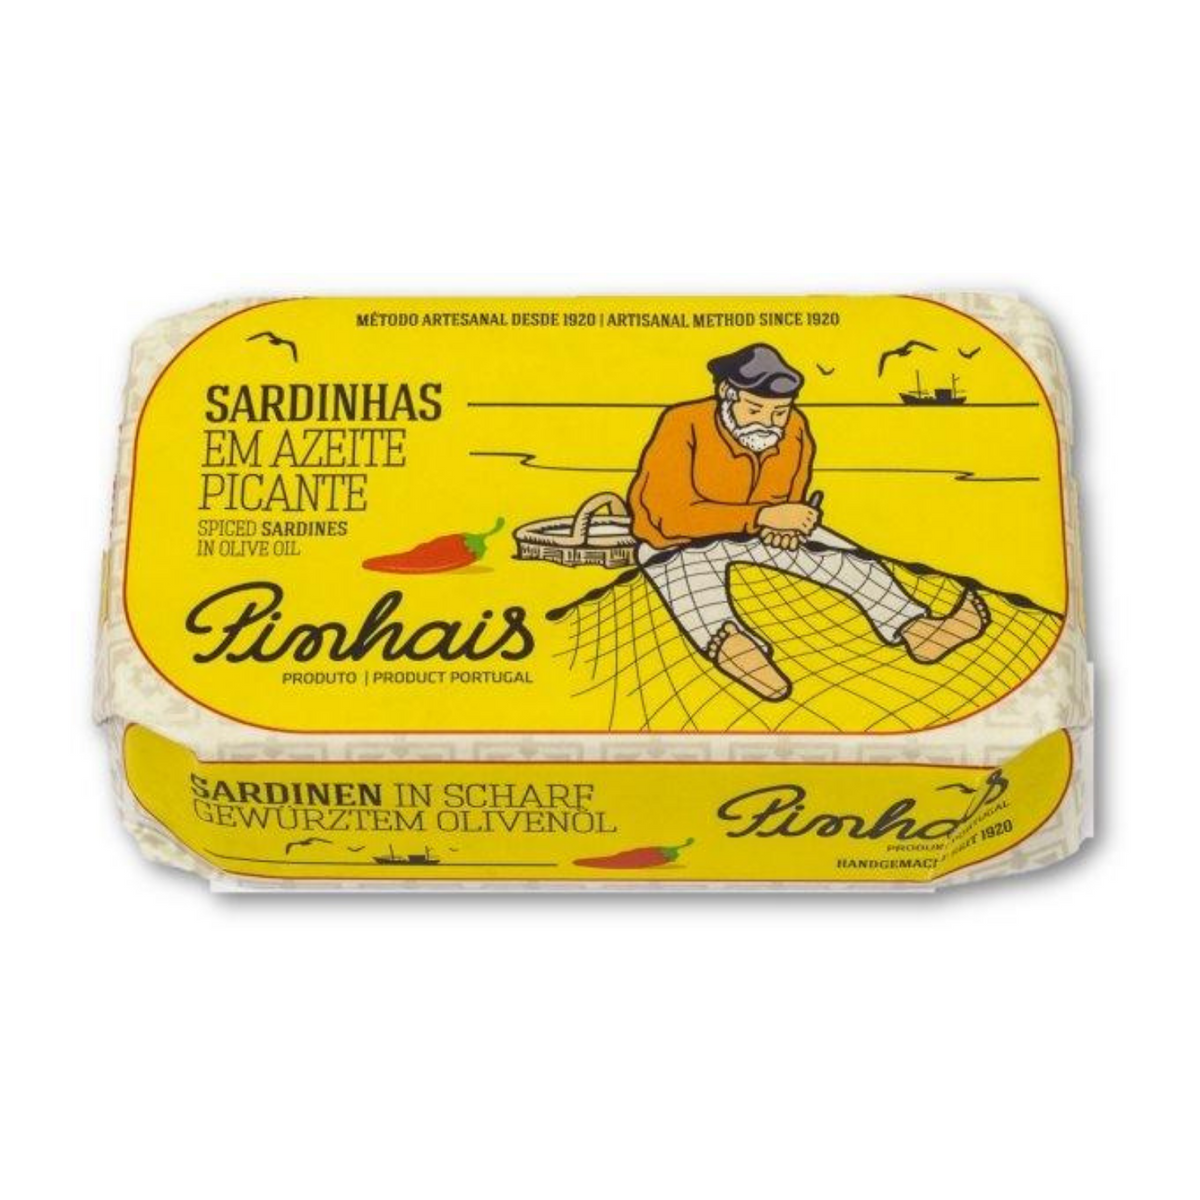 Pinhais sardines in olive oil – The Tinned Fish Market